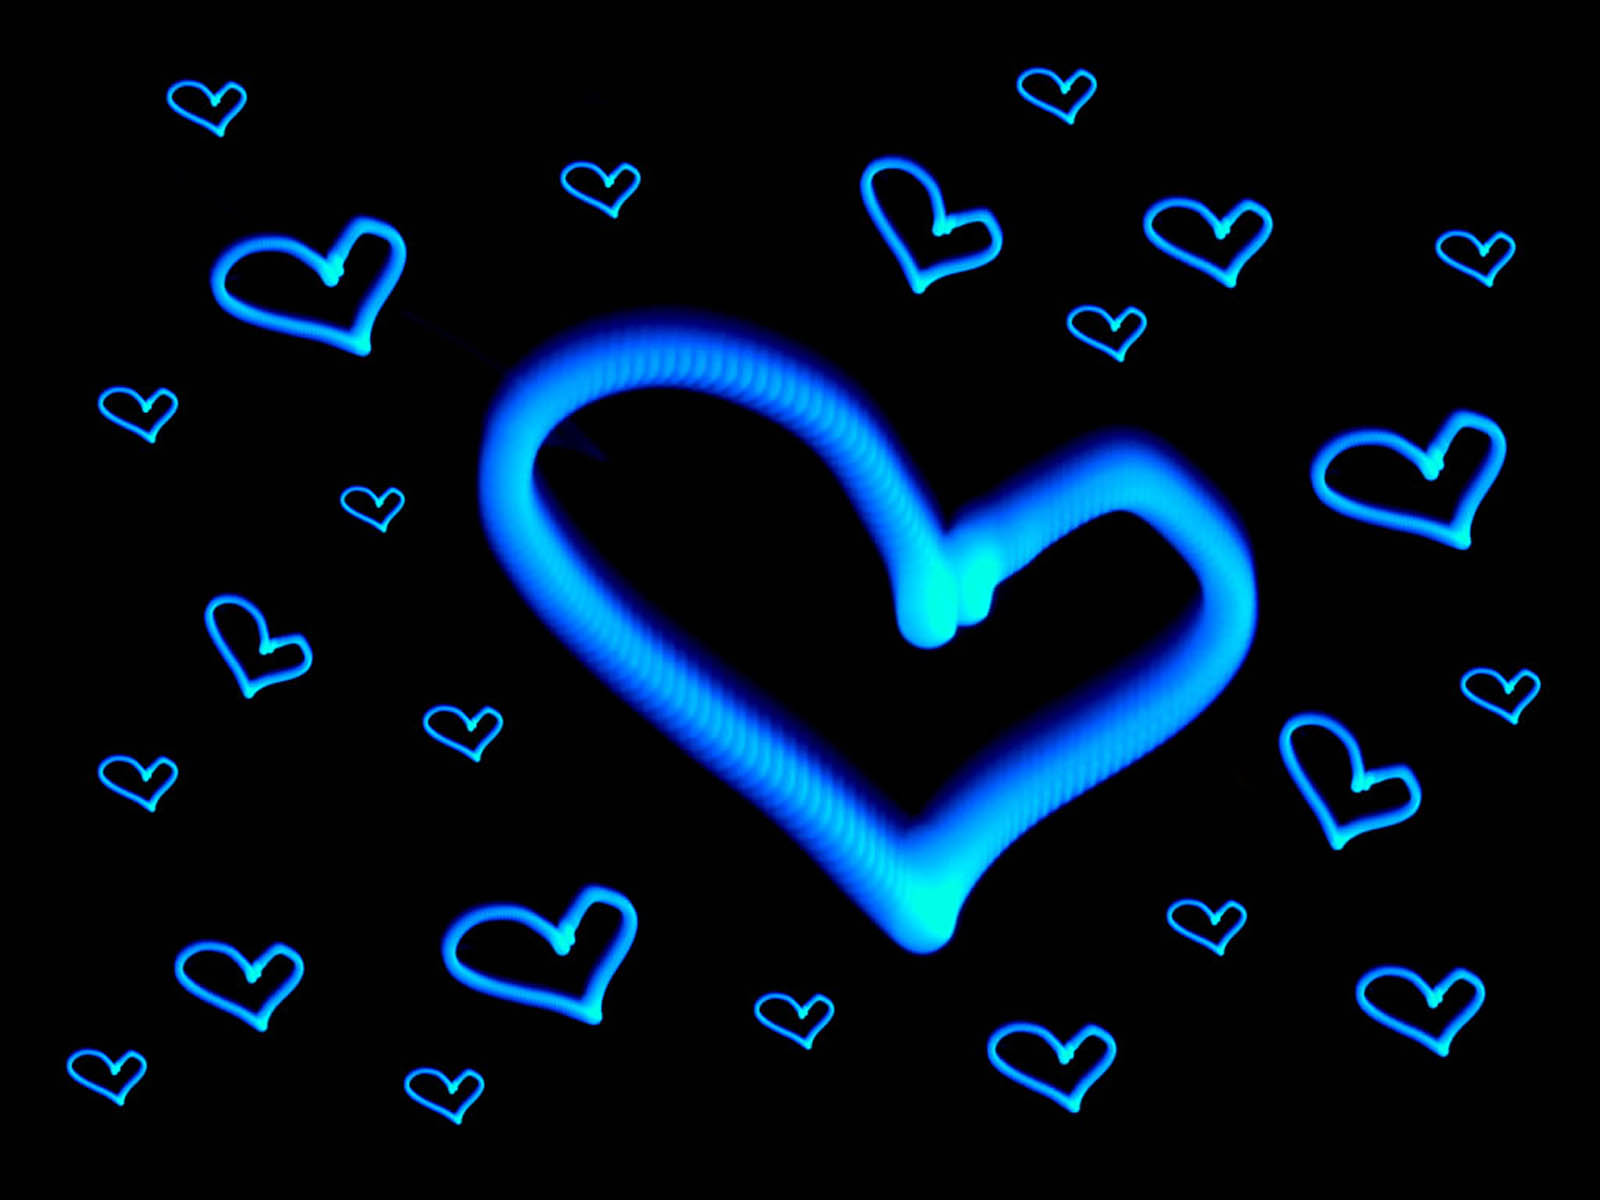 Blue Love Heart Image Amp Pictures Becuo